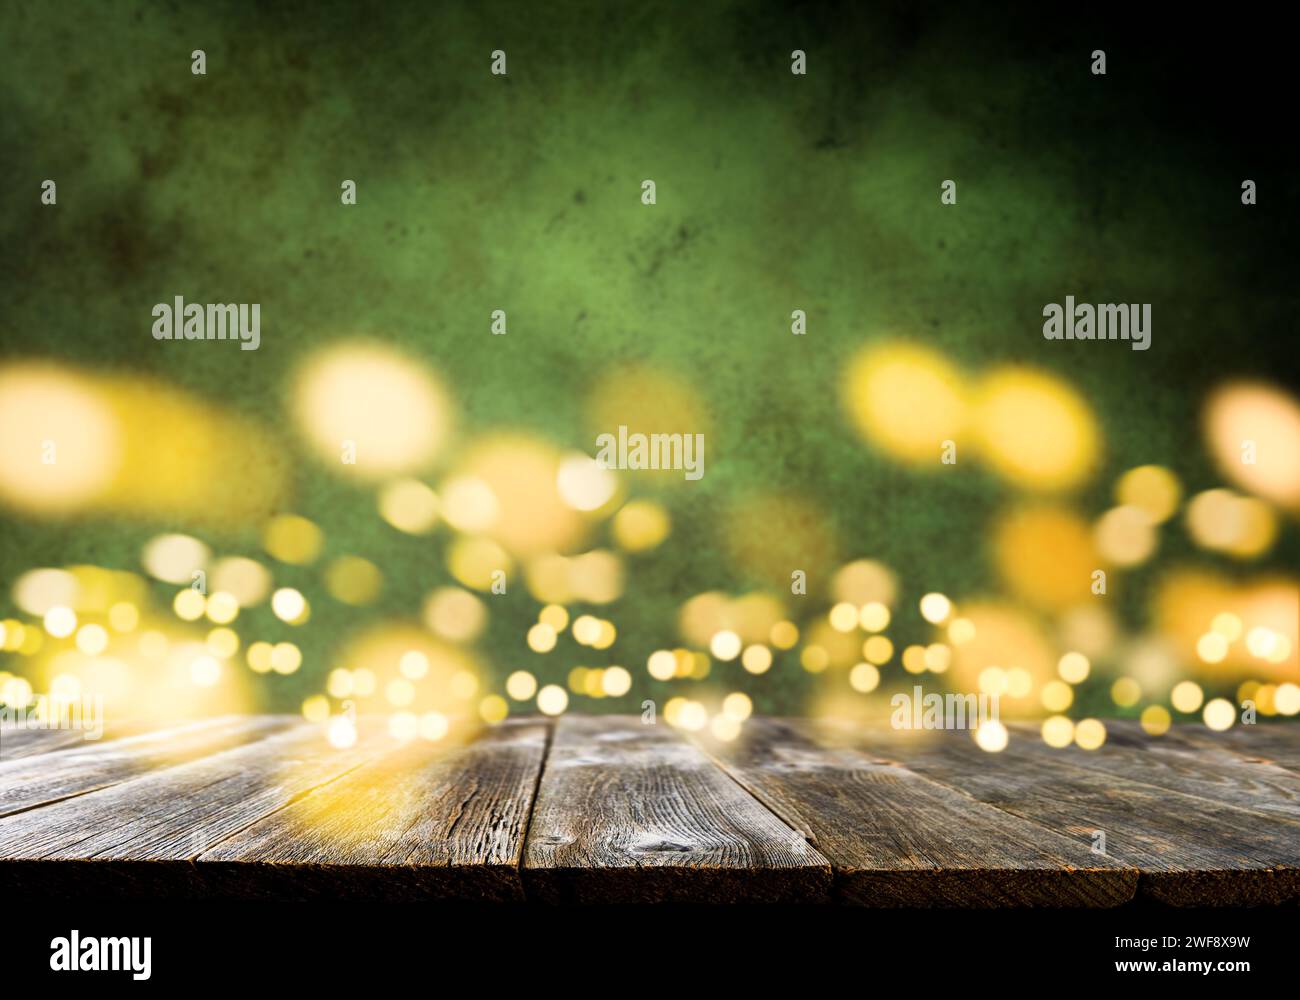 Happy St. Patricks Day background. Abstract green background with empty wooden table and glitter lights background. St. Patricks Day holidays wallpape Stock Photo